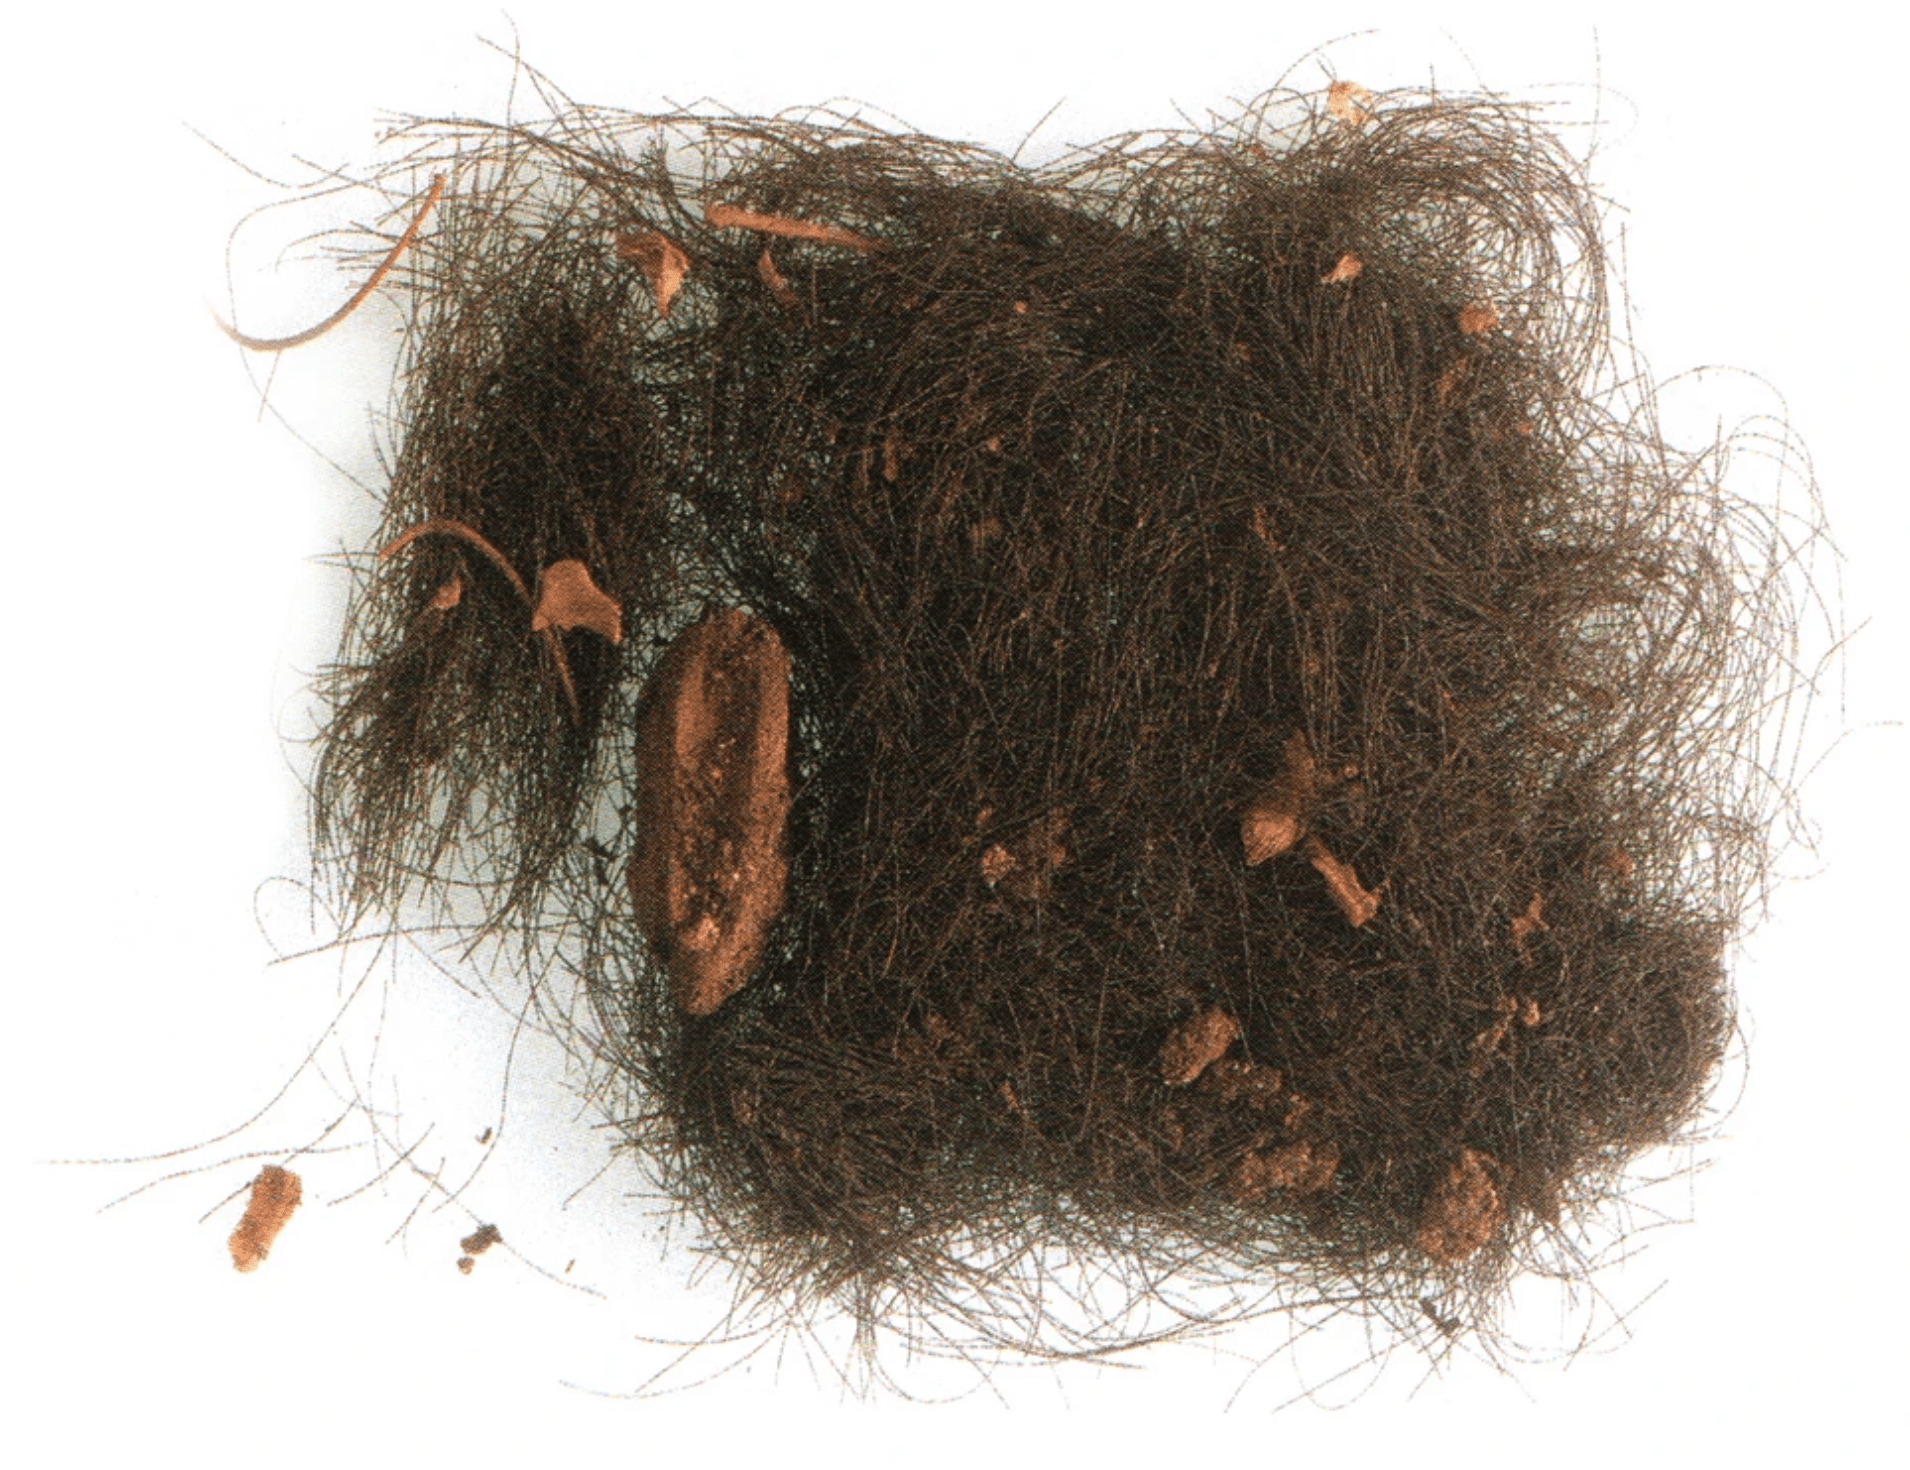 The ancient hair, flecked with bones. (Photo: P. Witte)